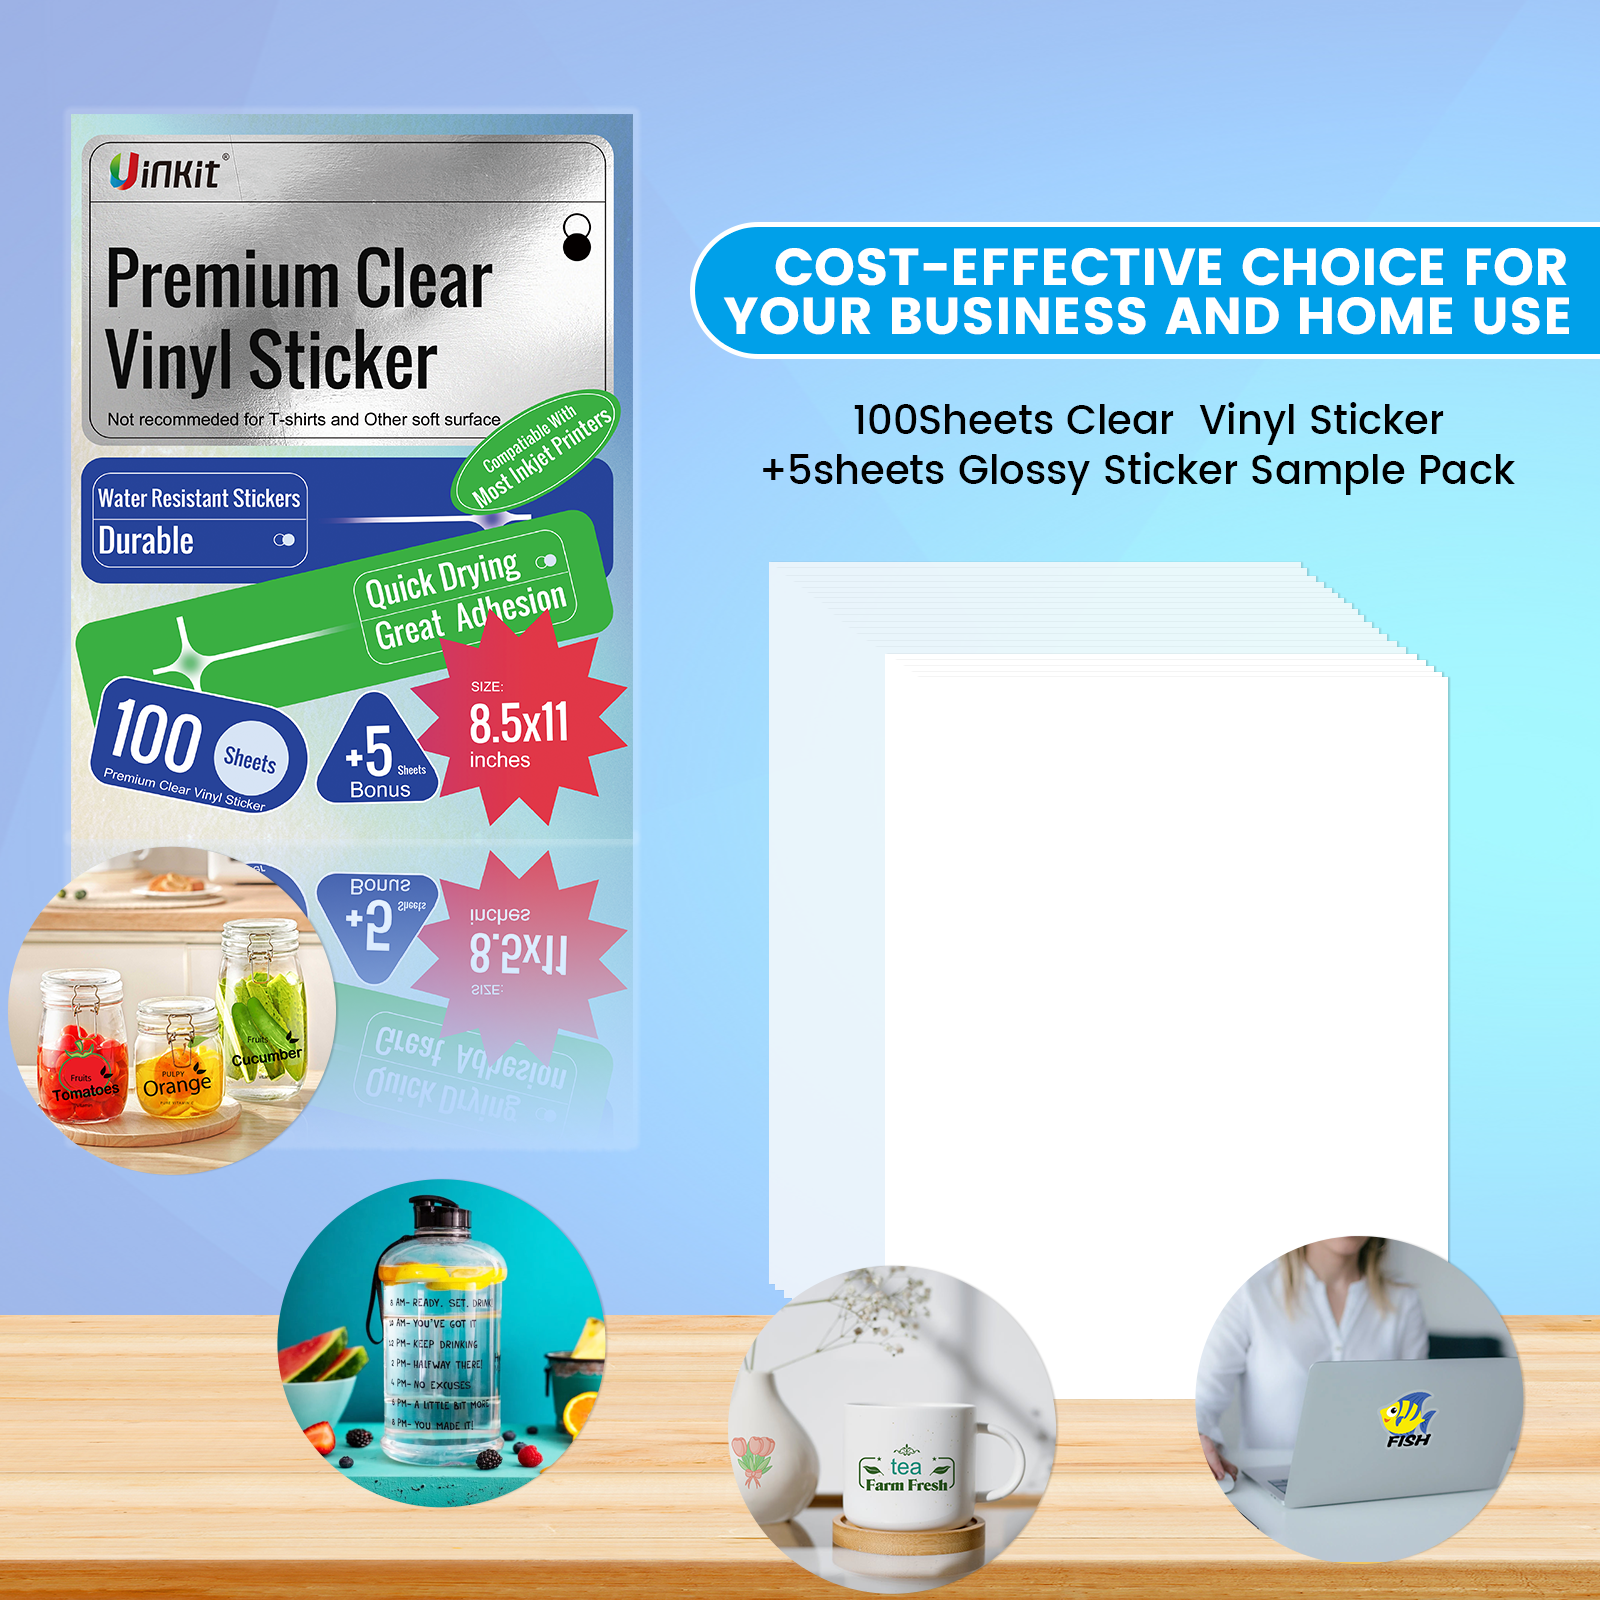 Premium Transparency Paper for Crafts - Clear Film - 8.5x11 Inches - 30  Sheets